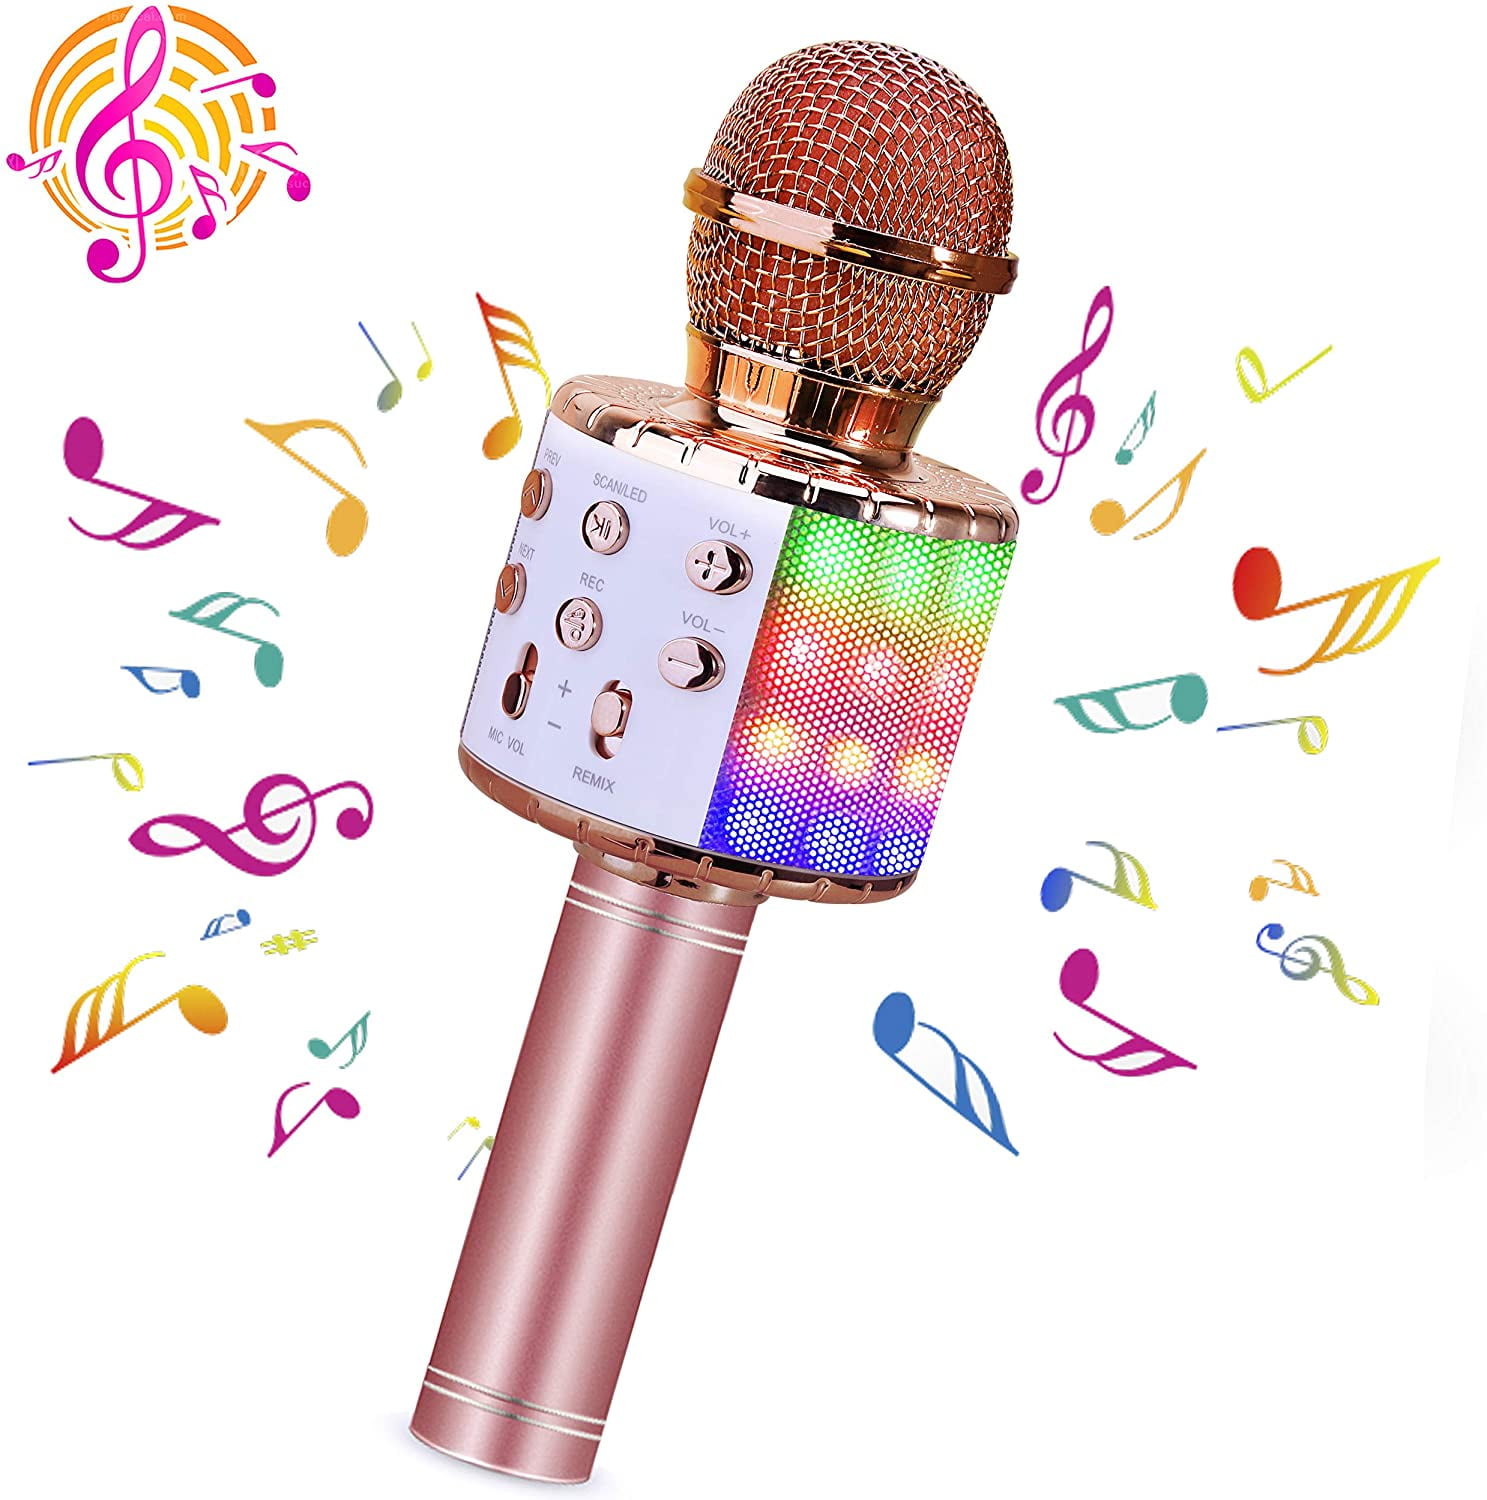 Multifunctional Speaker Machine for Kids and Adults Birthday Party Toys Gifts Wireless Karaoke Microphone Arisen Portable Karaok Handheld Mic with LED Screen 